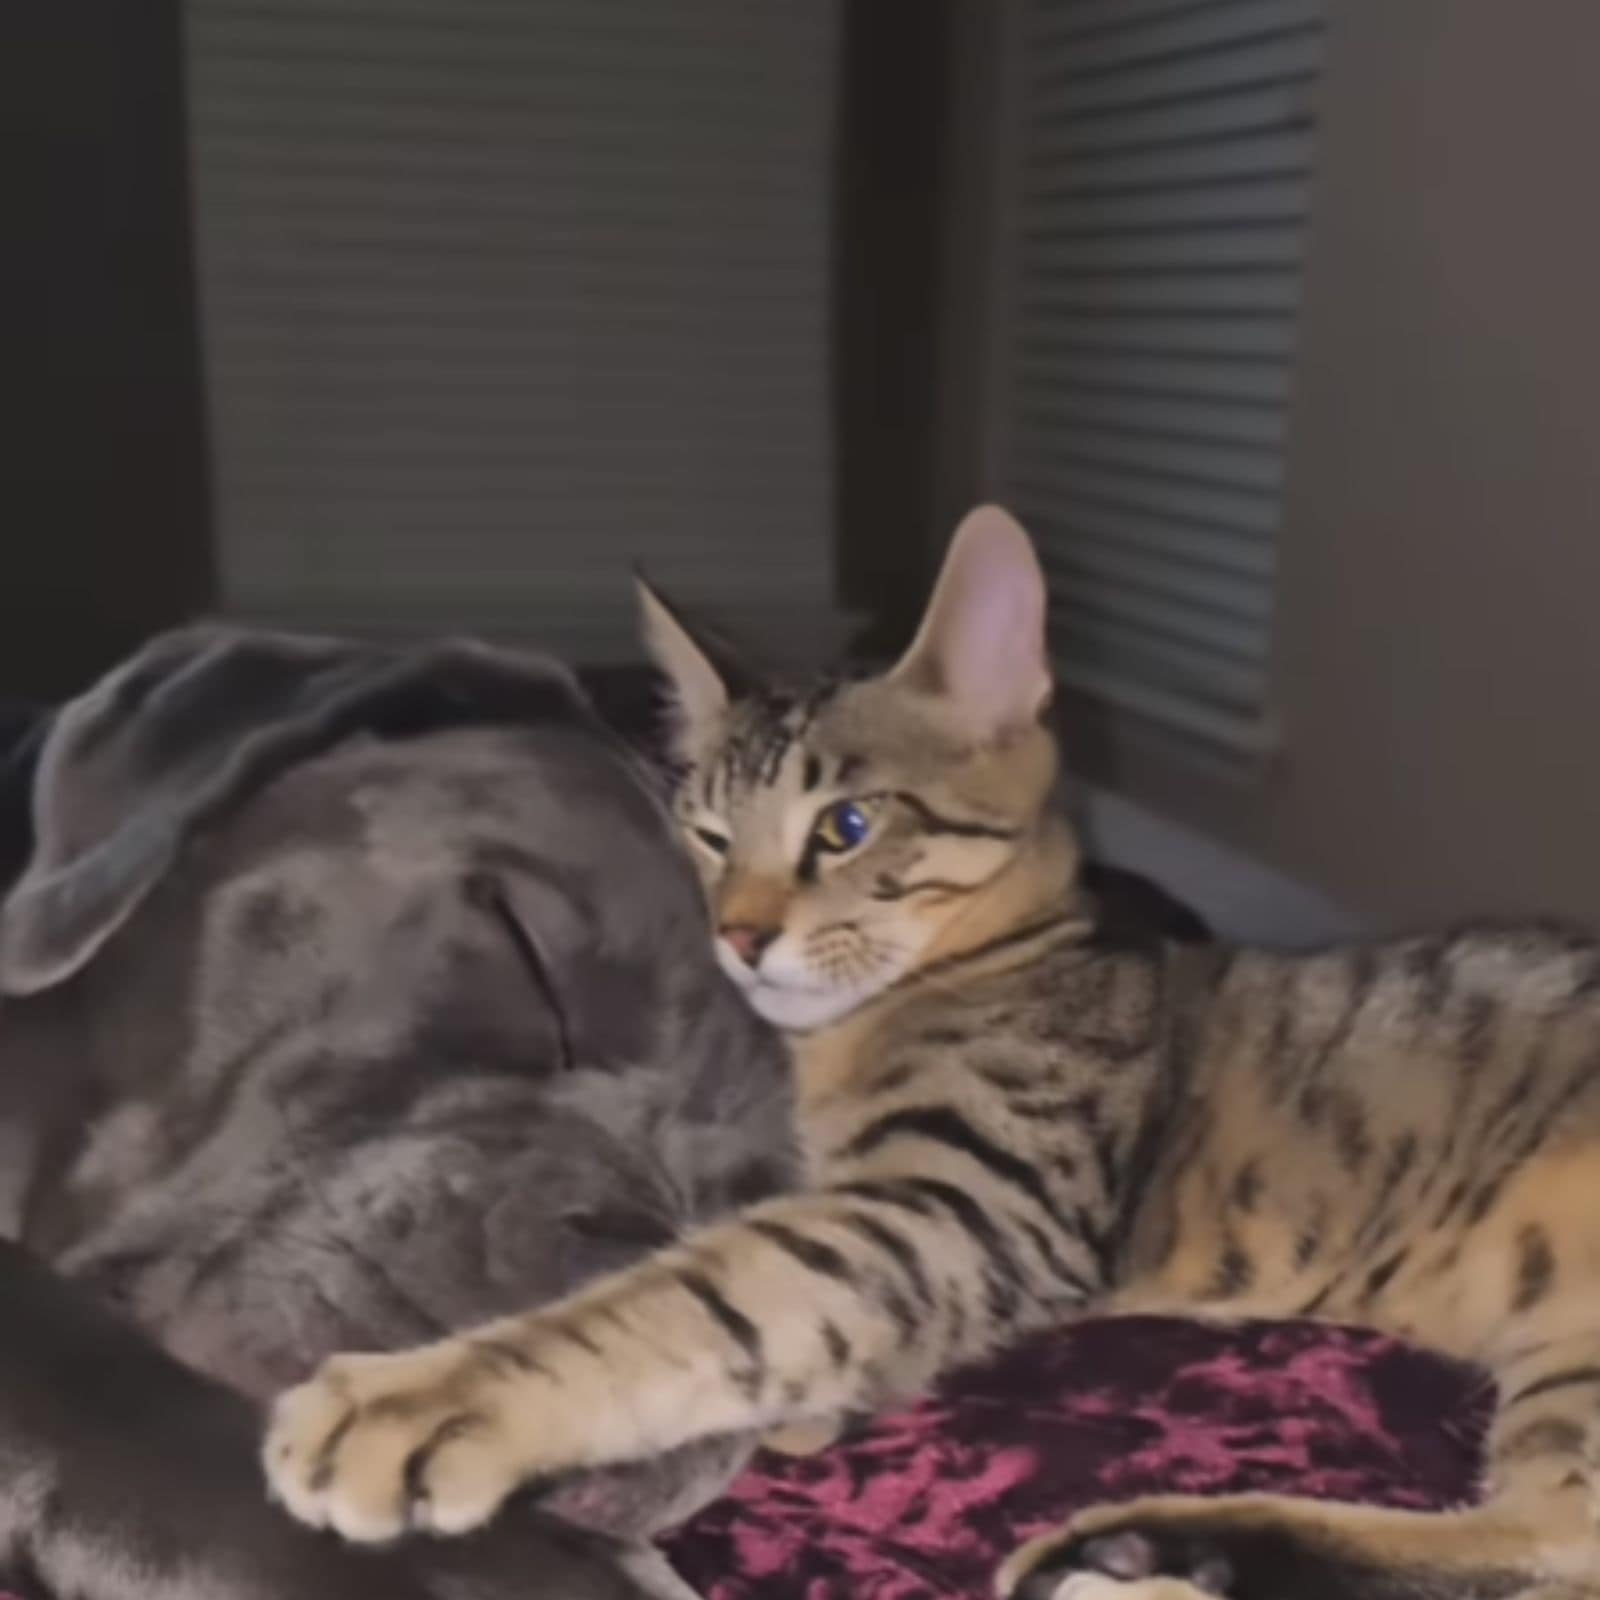 the cat hugged the head of the dog brother while he was sleeping